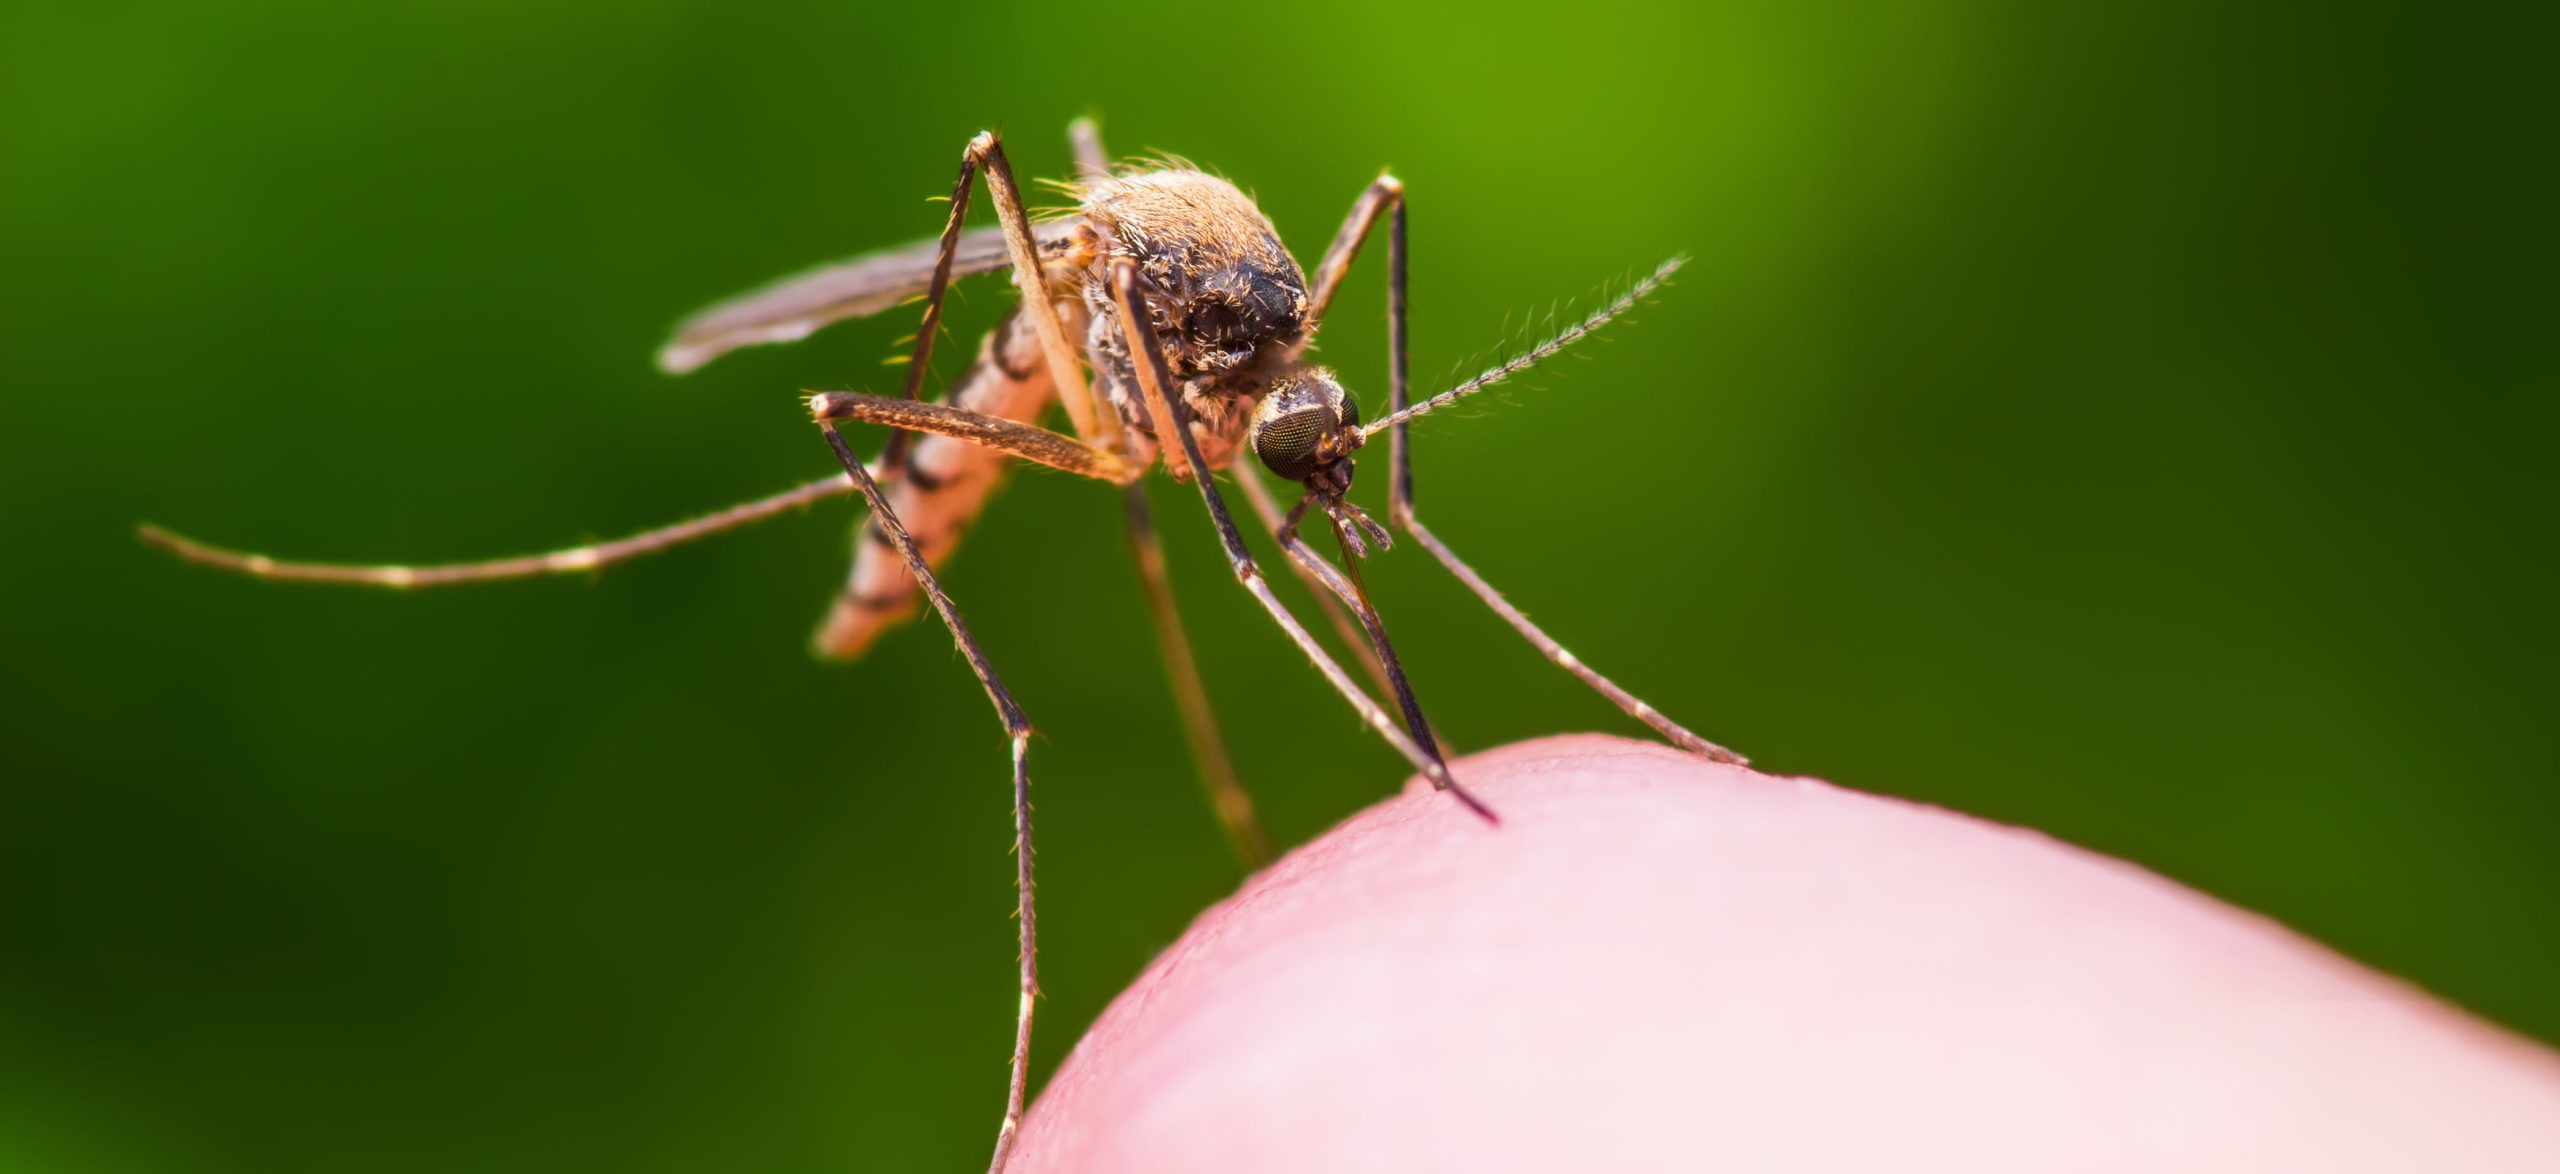 A close-up photo of a mosquito biting someone's finger